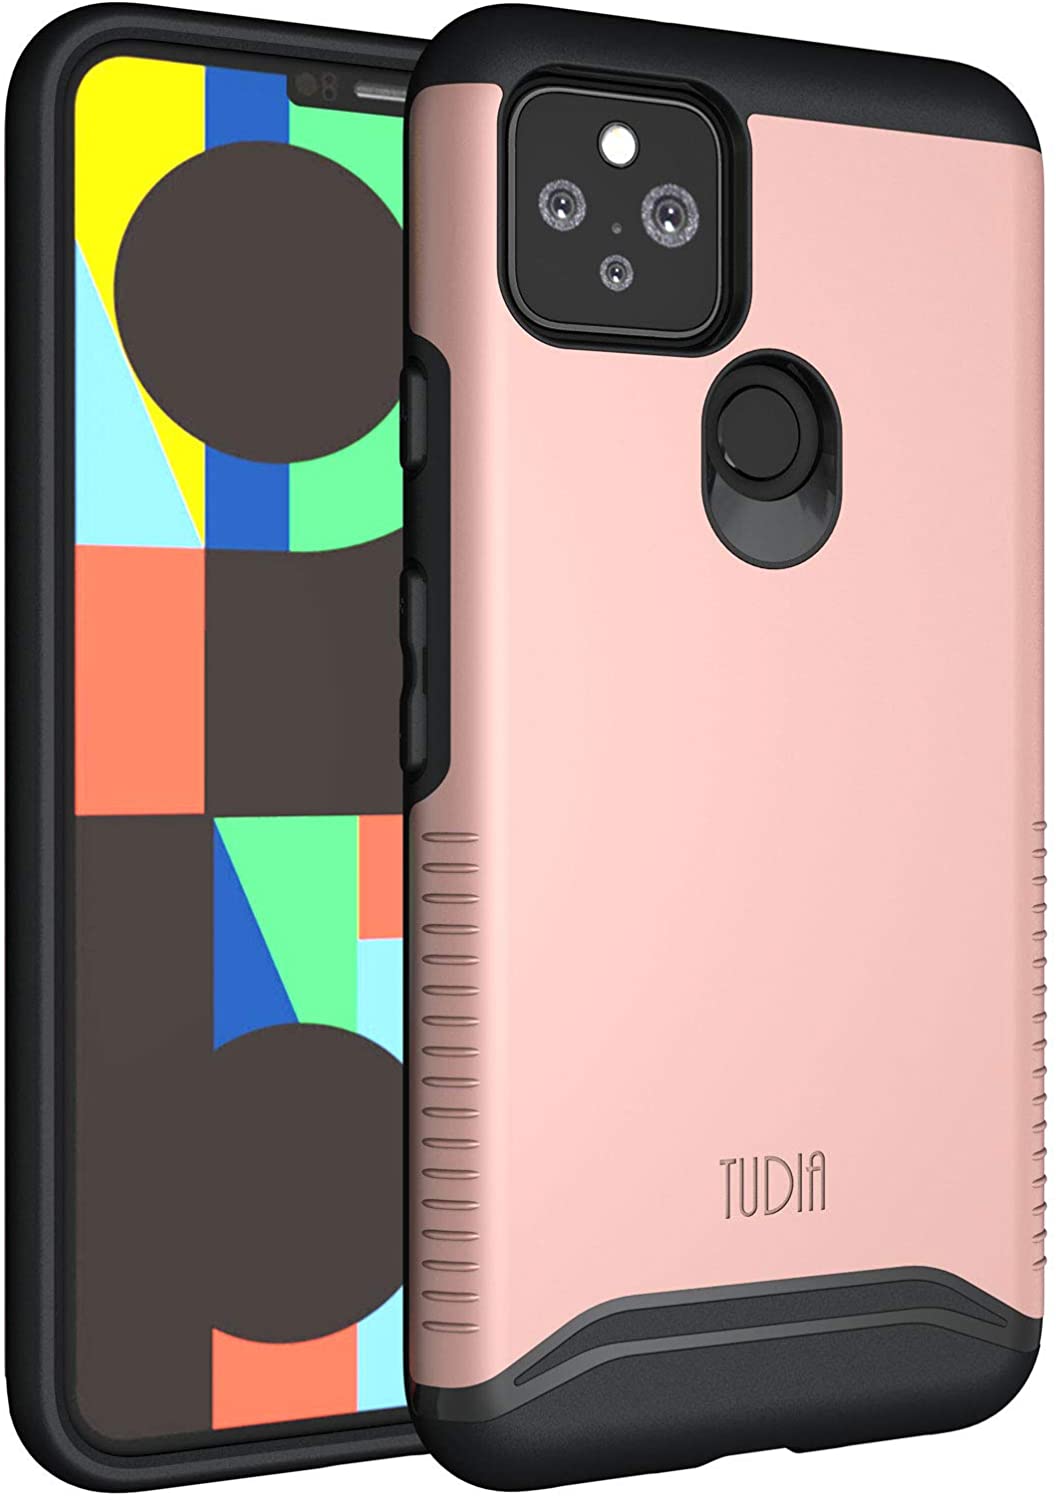 Best Google Pixel 4a 5g Cases 2021 Android Central A compact phone that's easy to use, a beautiful. best google pixel 4a 5g cases 2021